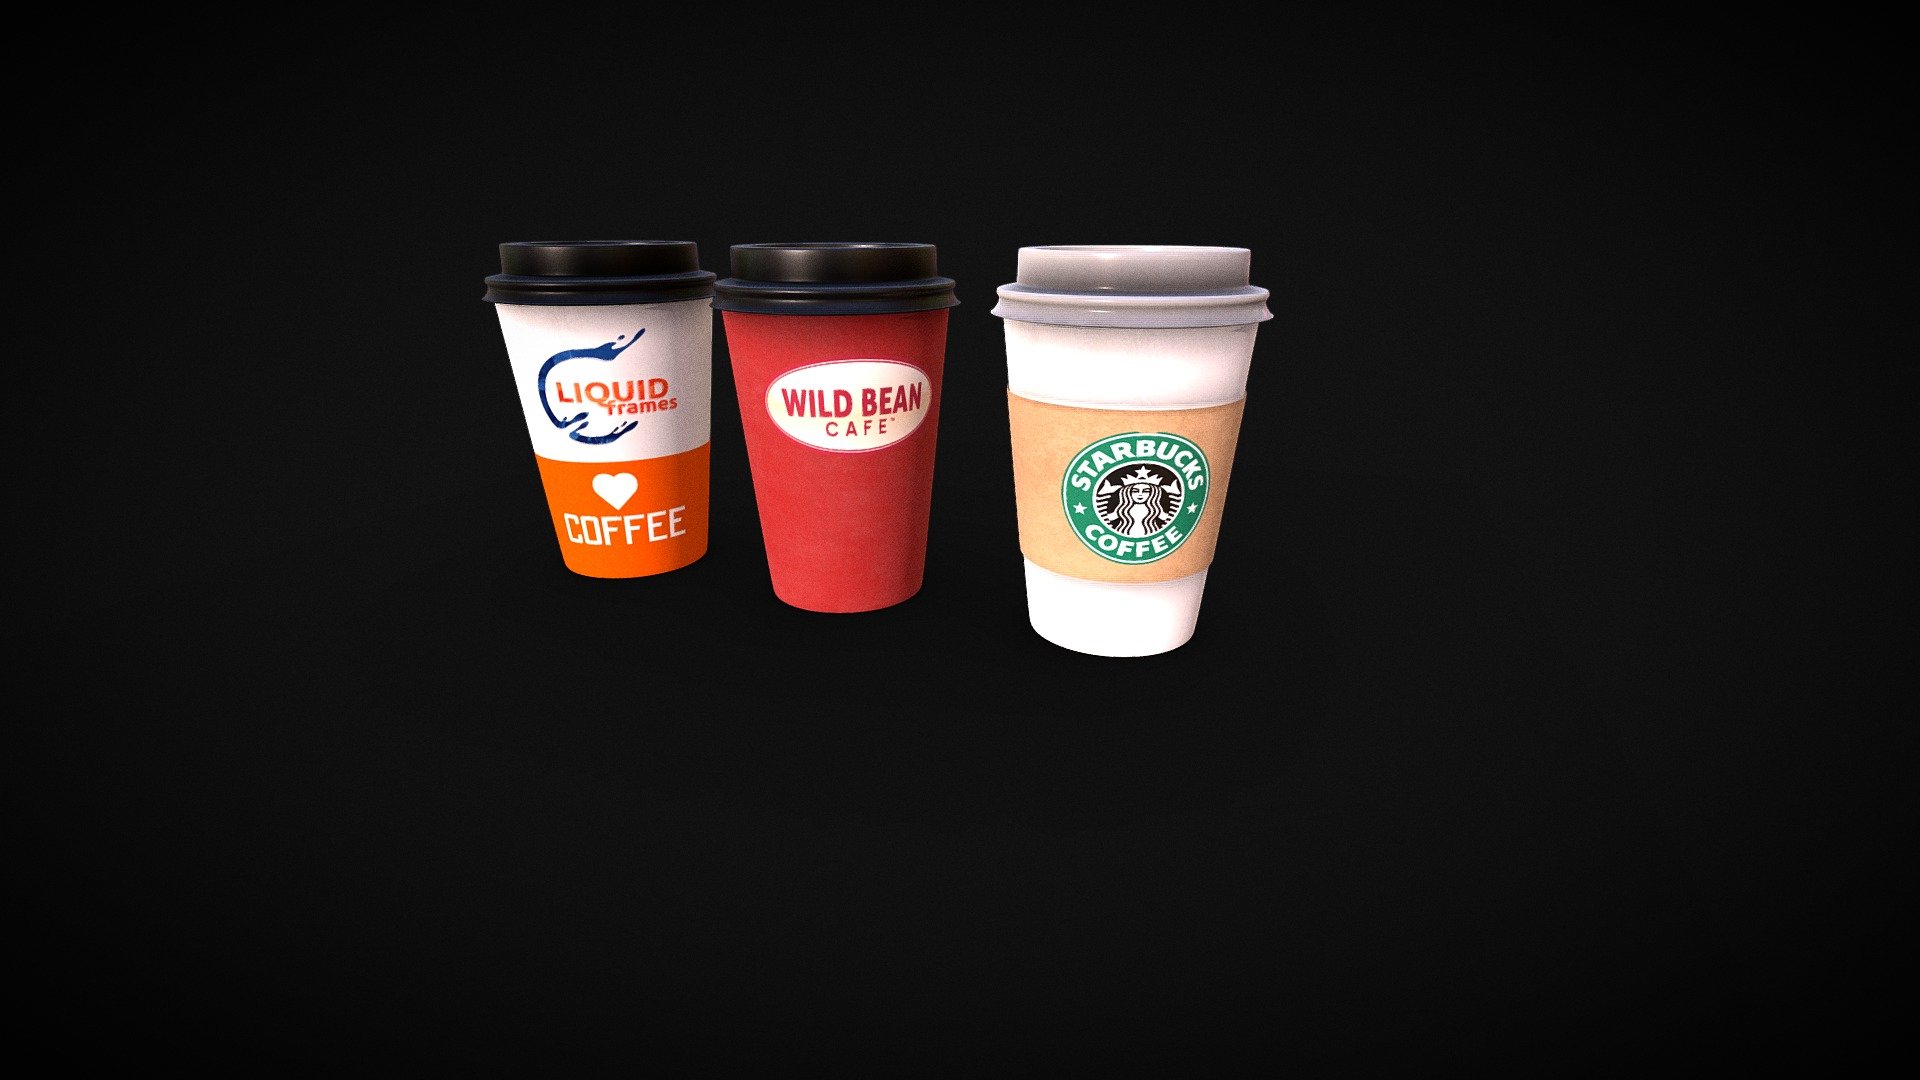 3 Papper coffee cups. Starbucks, Wildbean Cafe.
Modeled in Blender and textured in Substance Painter 3d model